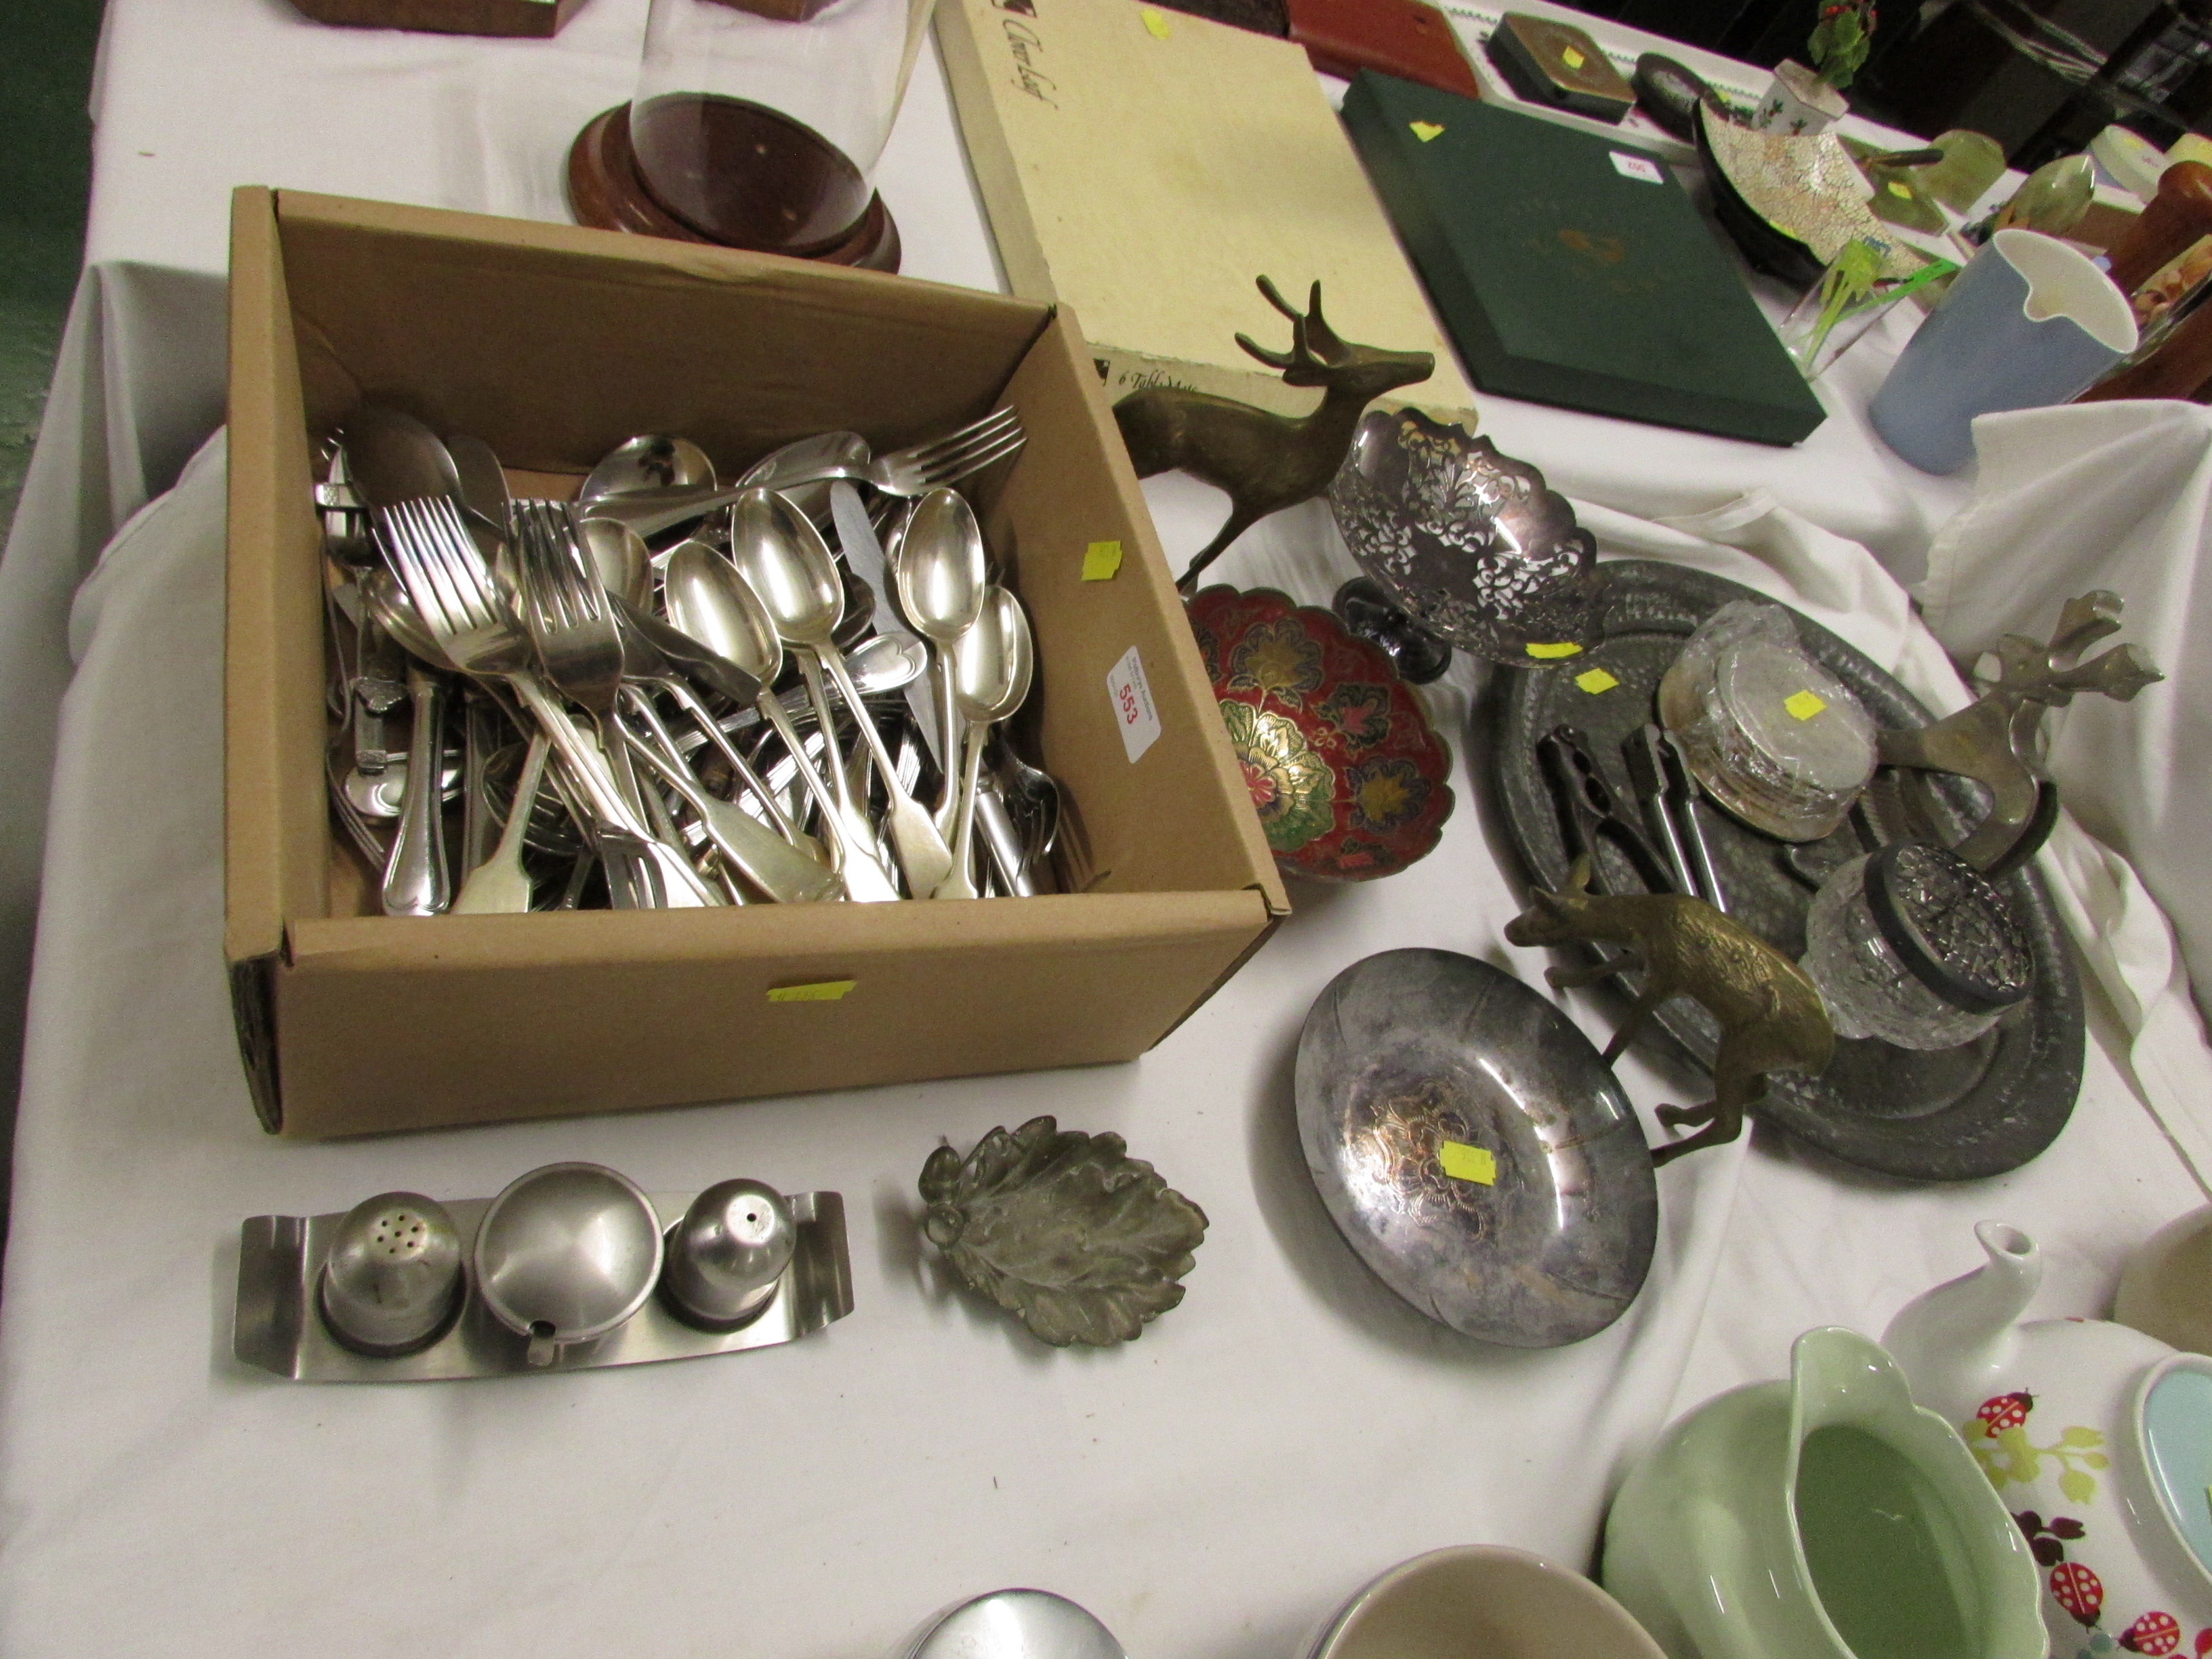 PLANISHED PEWTER TRAY, SILVER-PLATED BOWL ON FOOT, ASSORTED CUTLERY AND OTHER METAL WARE